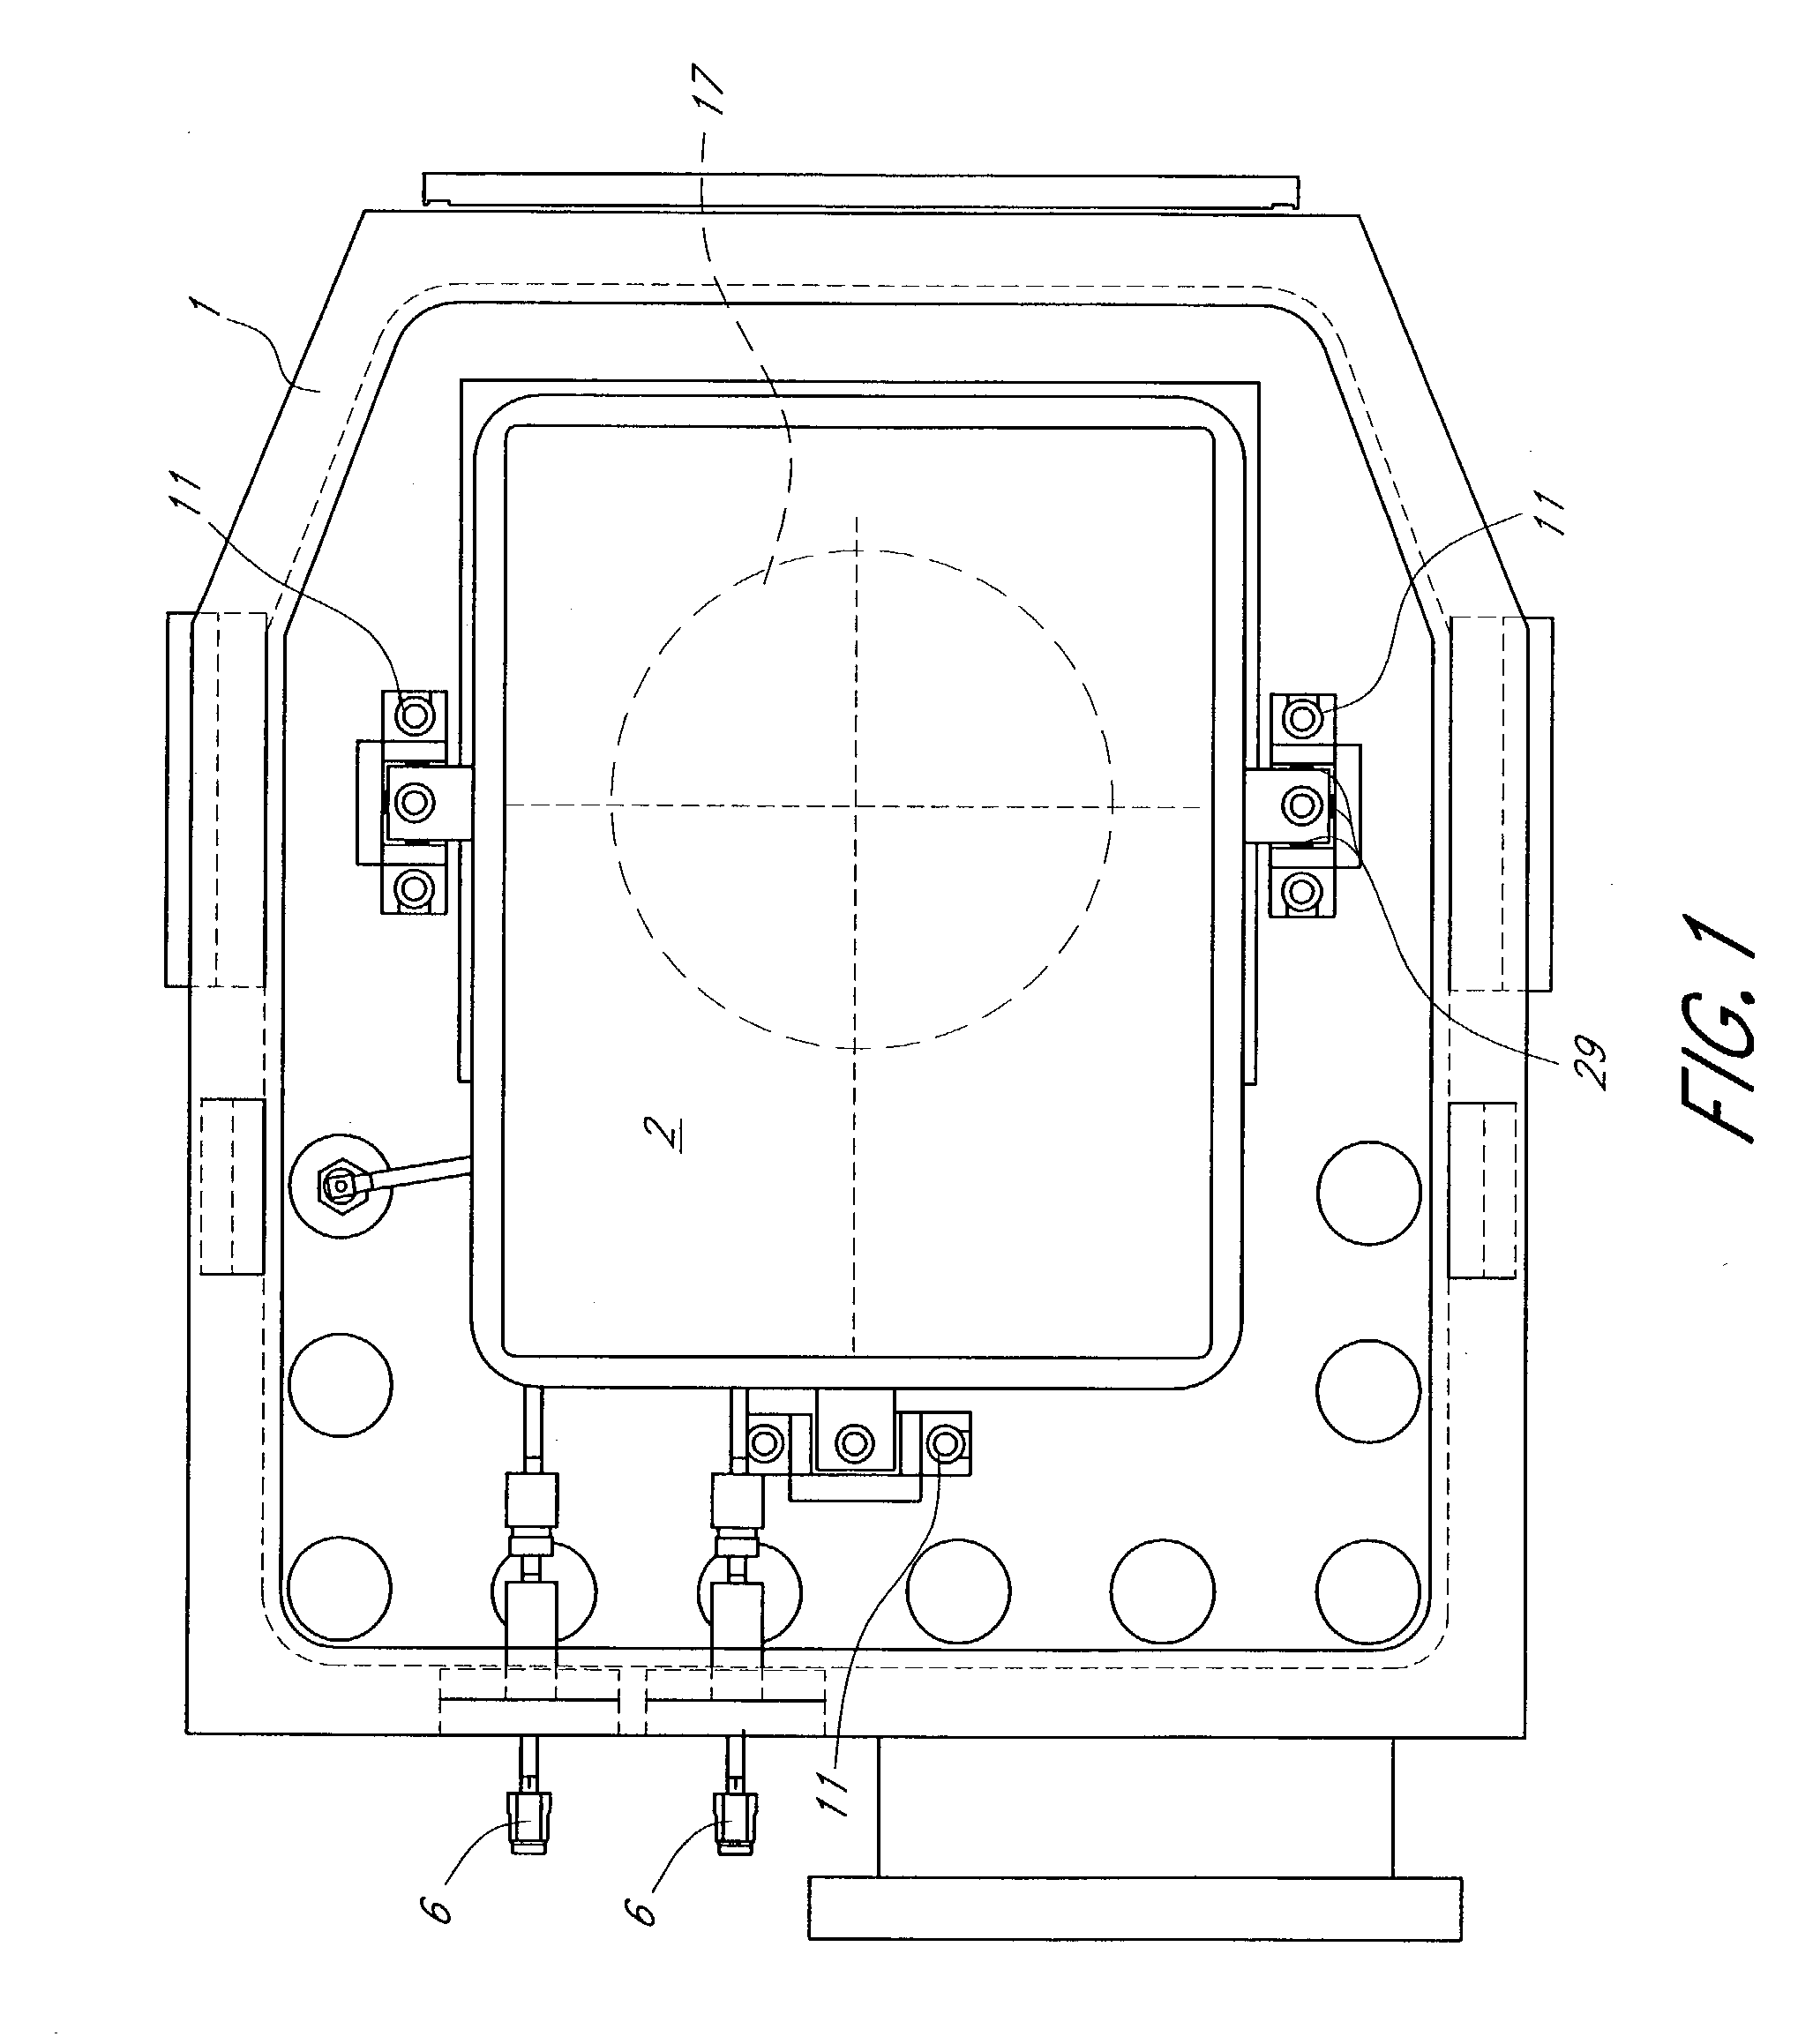 Apparatus for fabrication of thin films